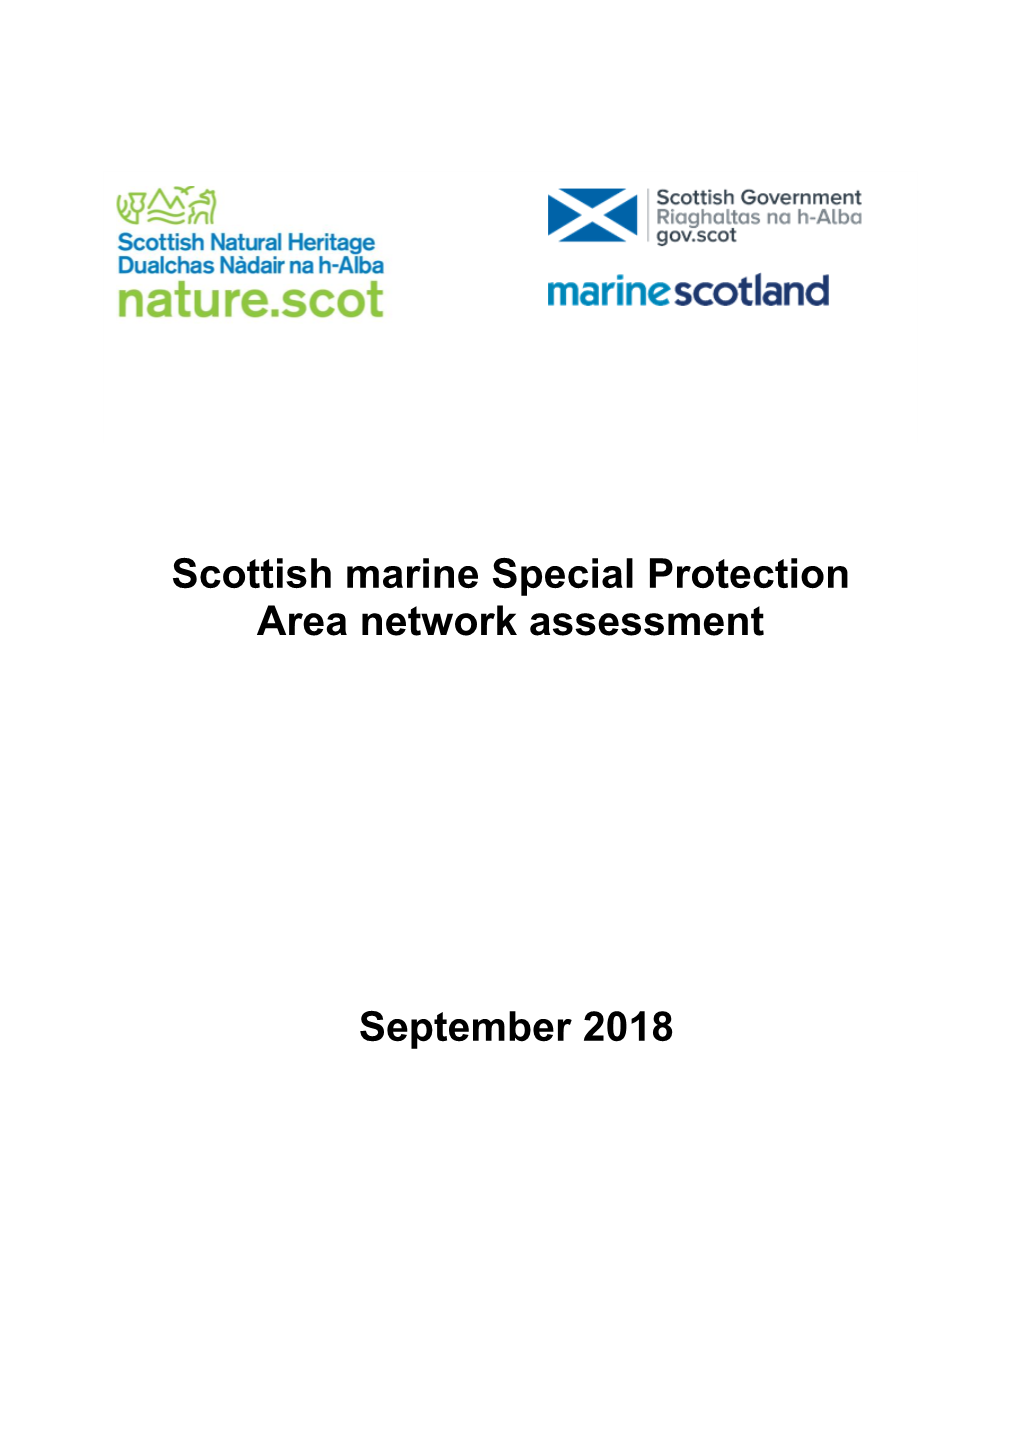 Scottish Marine Special Protection Area Network Assessment